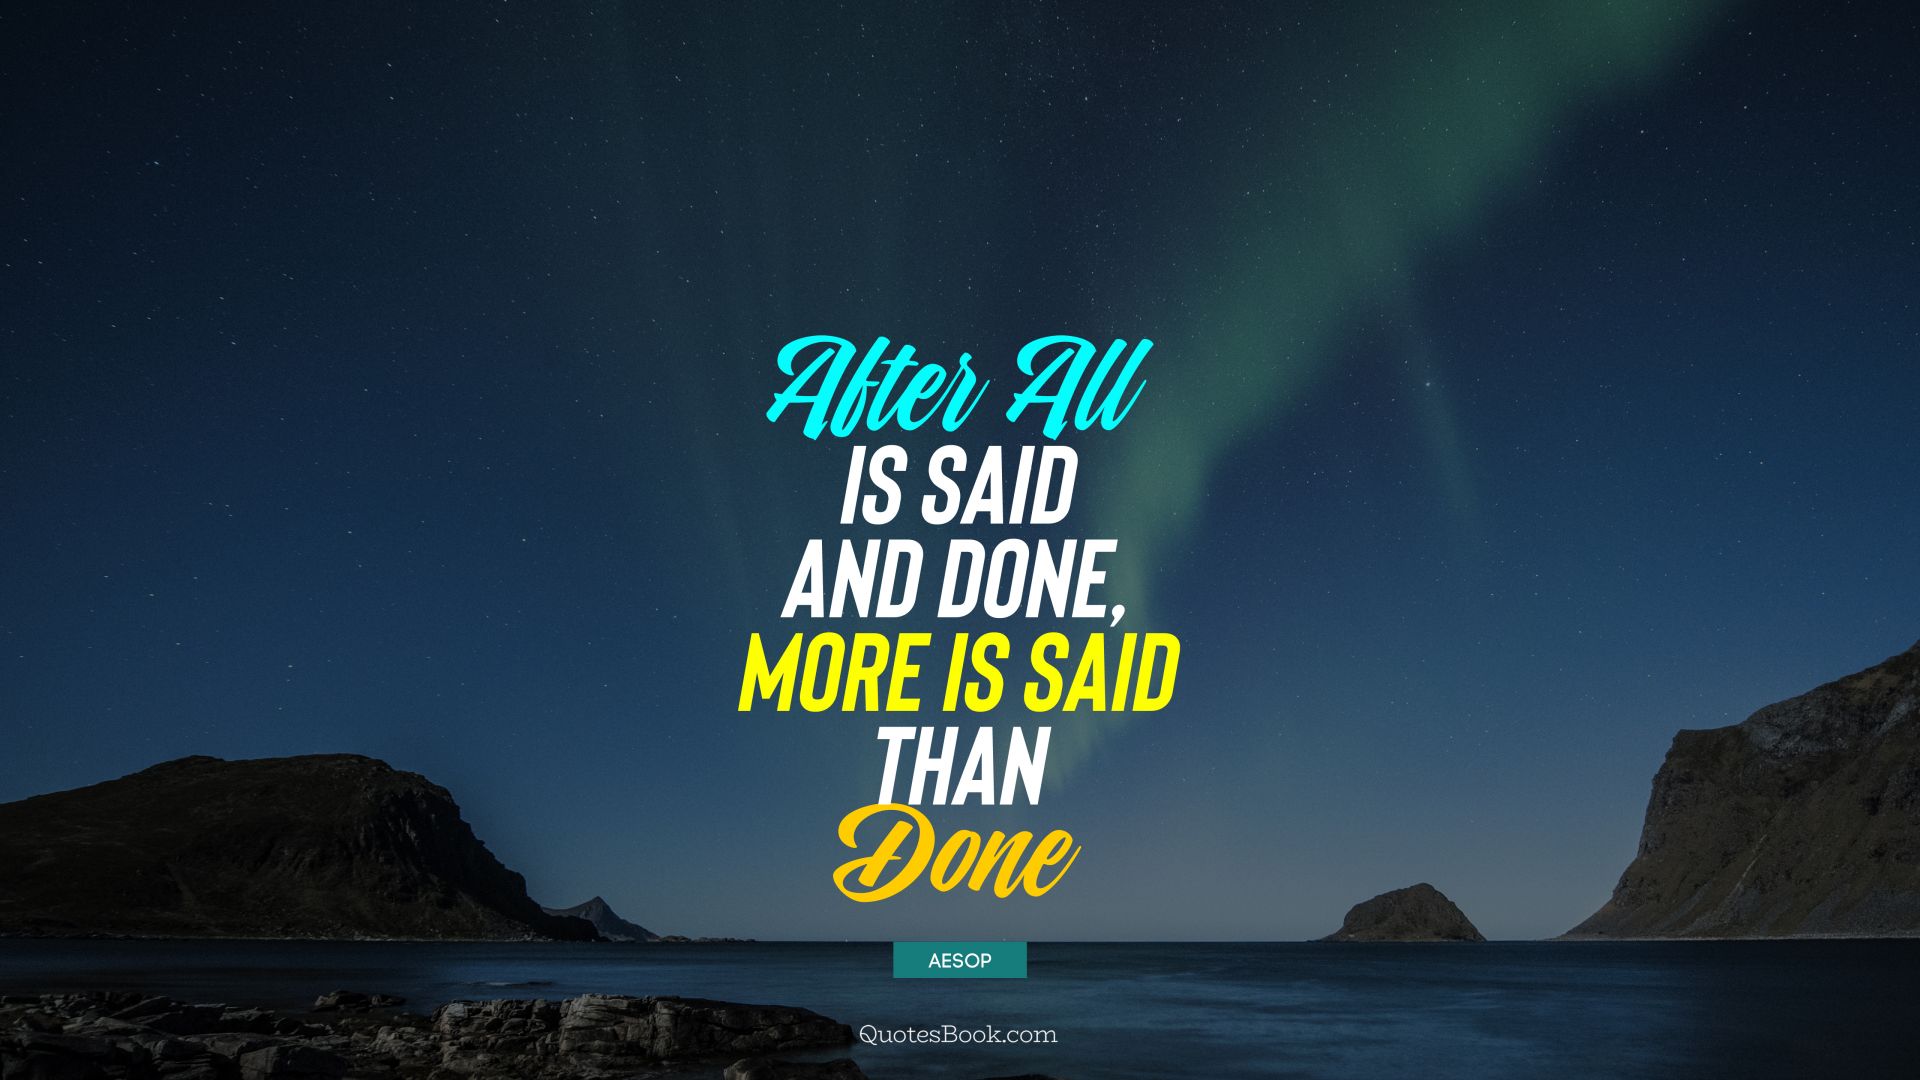 After all is said and done, more is said than done. - Quote by Aesop